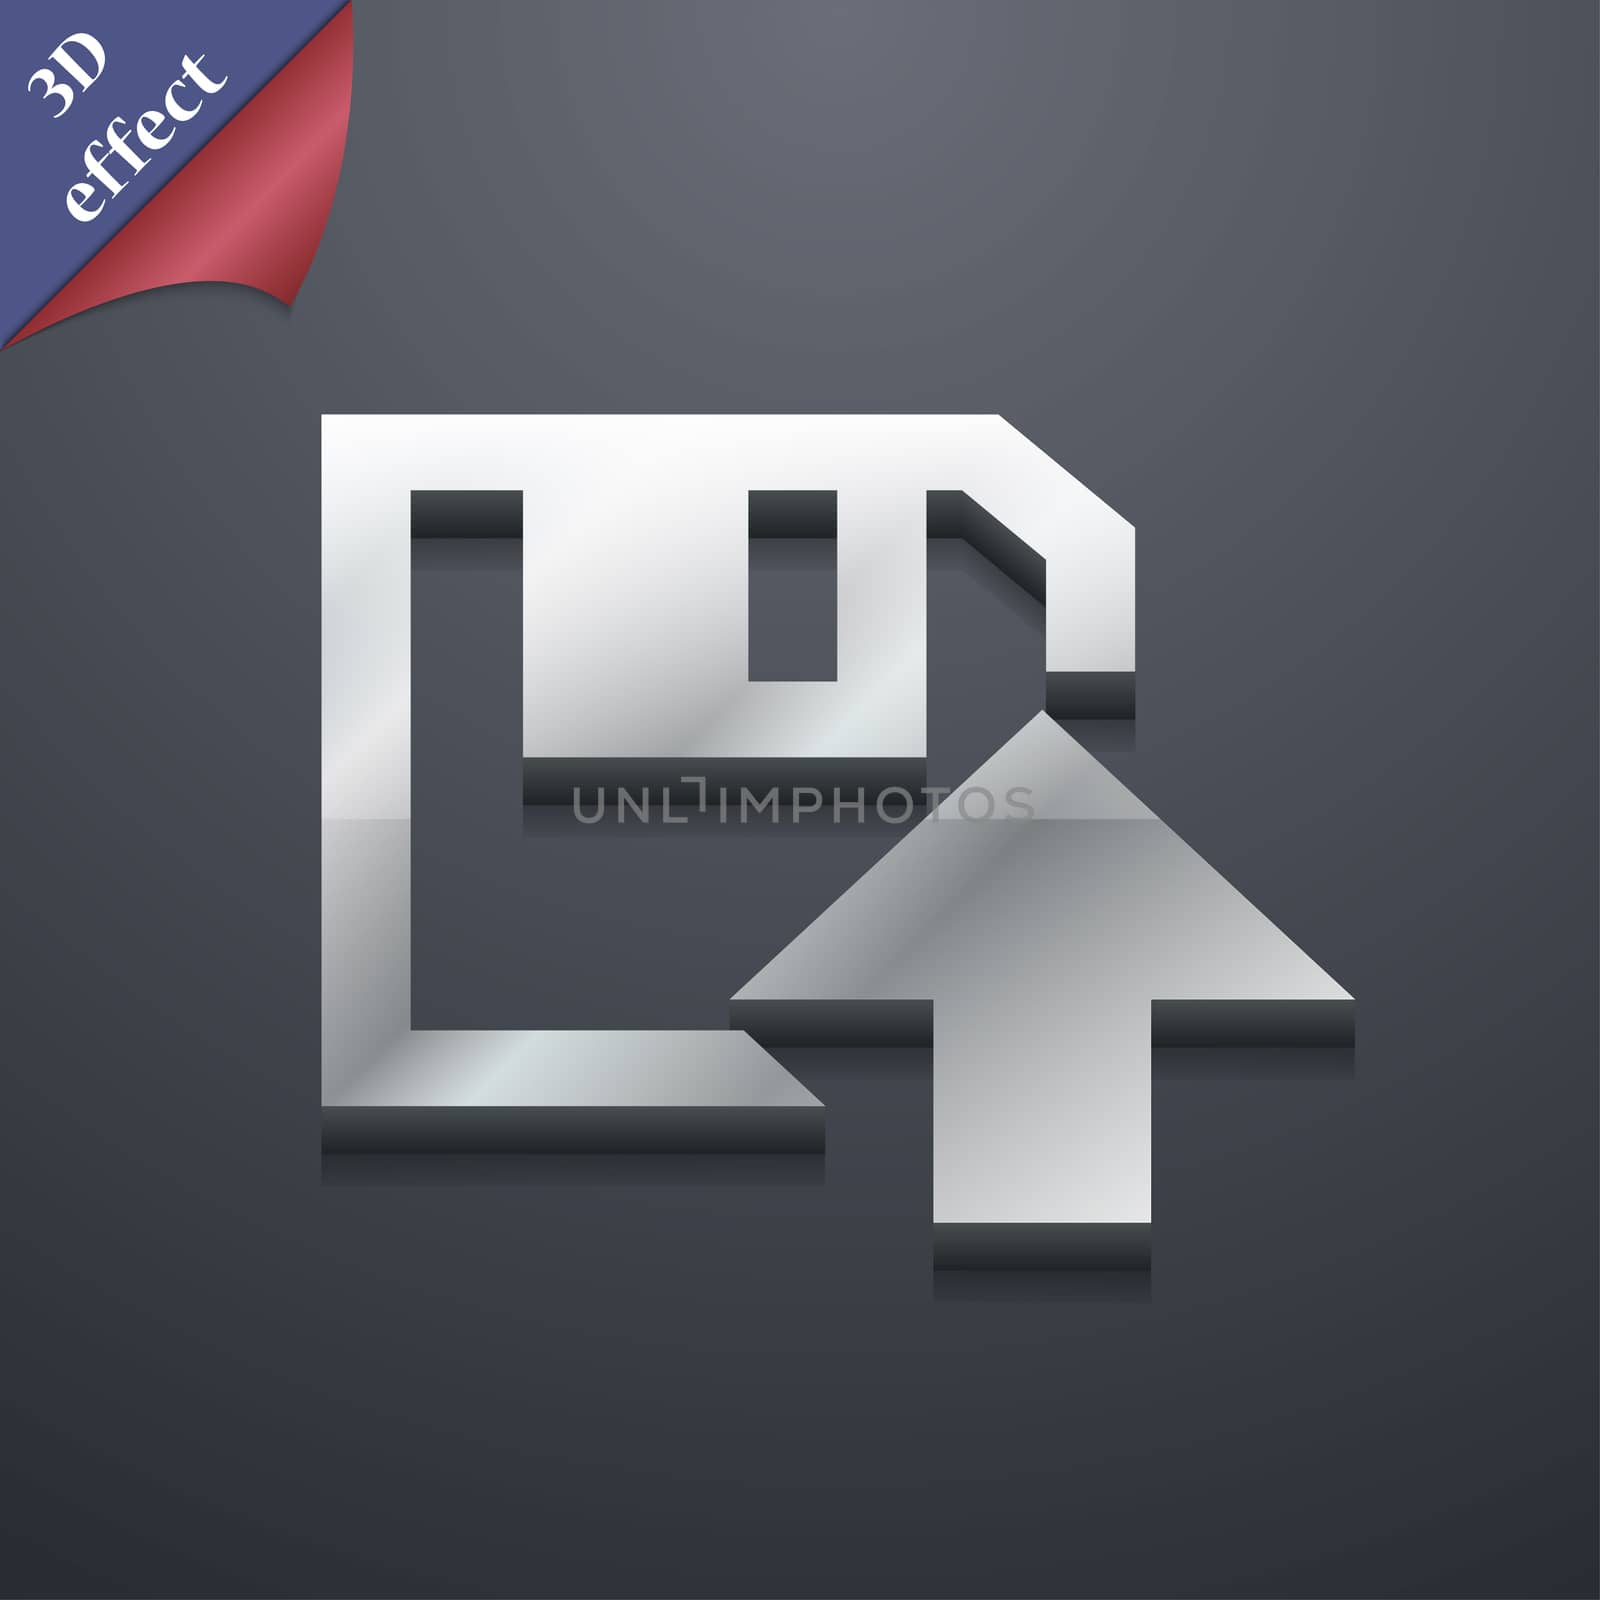 floppy icon symbol. 3D style. Trendy, modern design with space for your text illustration. Rastrized copy